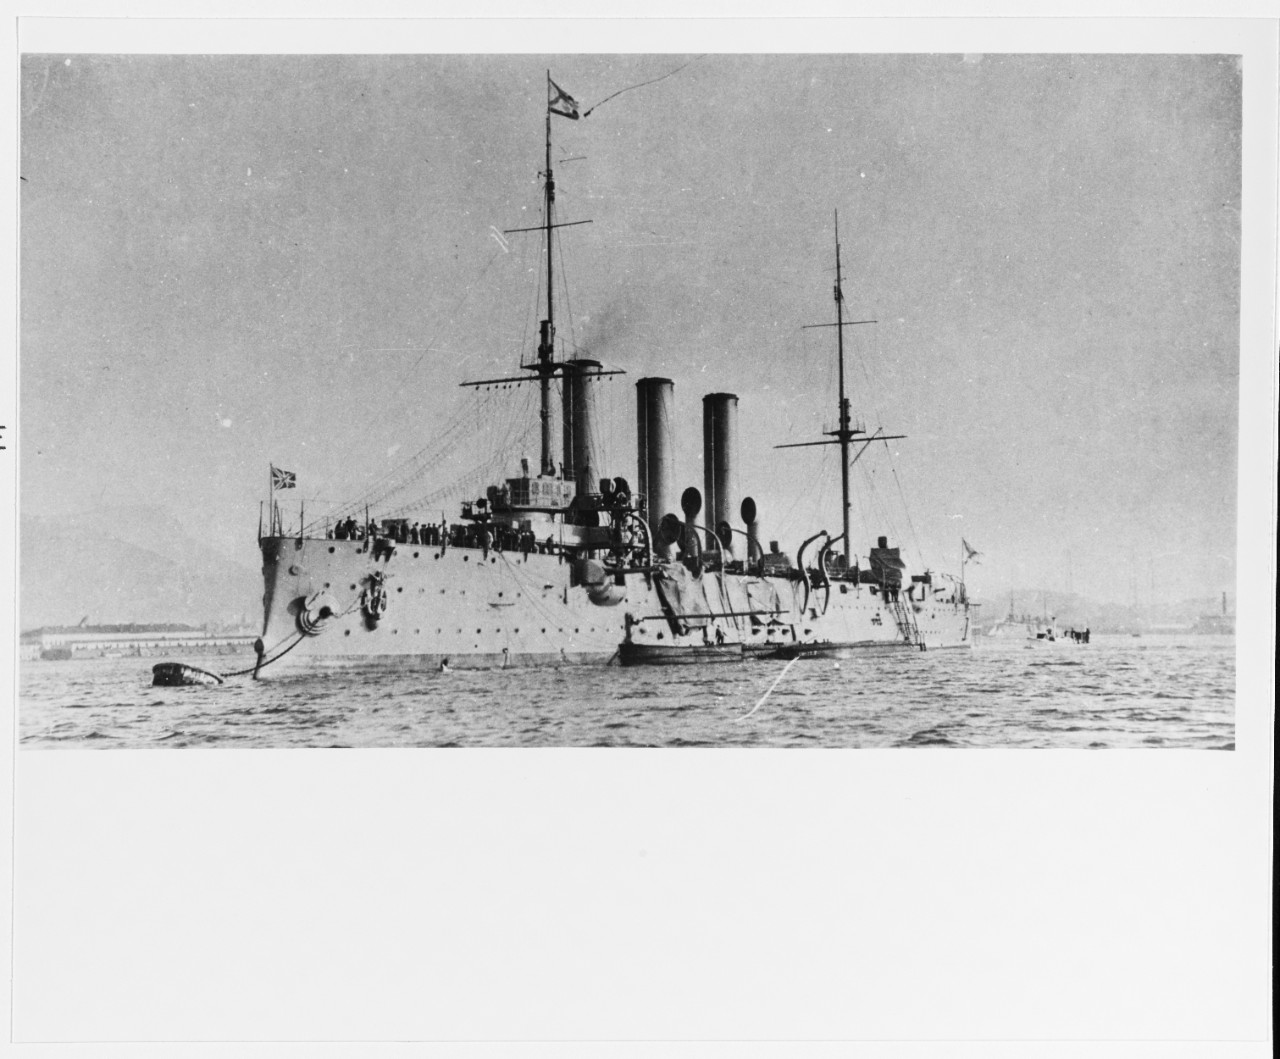 DIANA (Russian protected cruiser, 1899-1922)